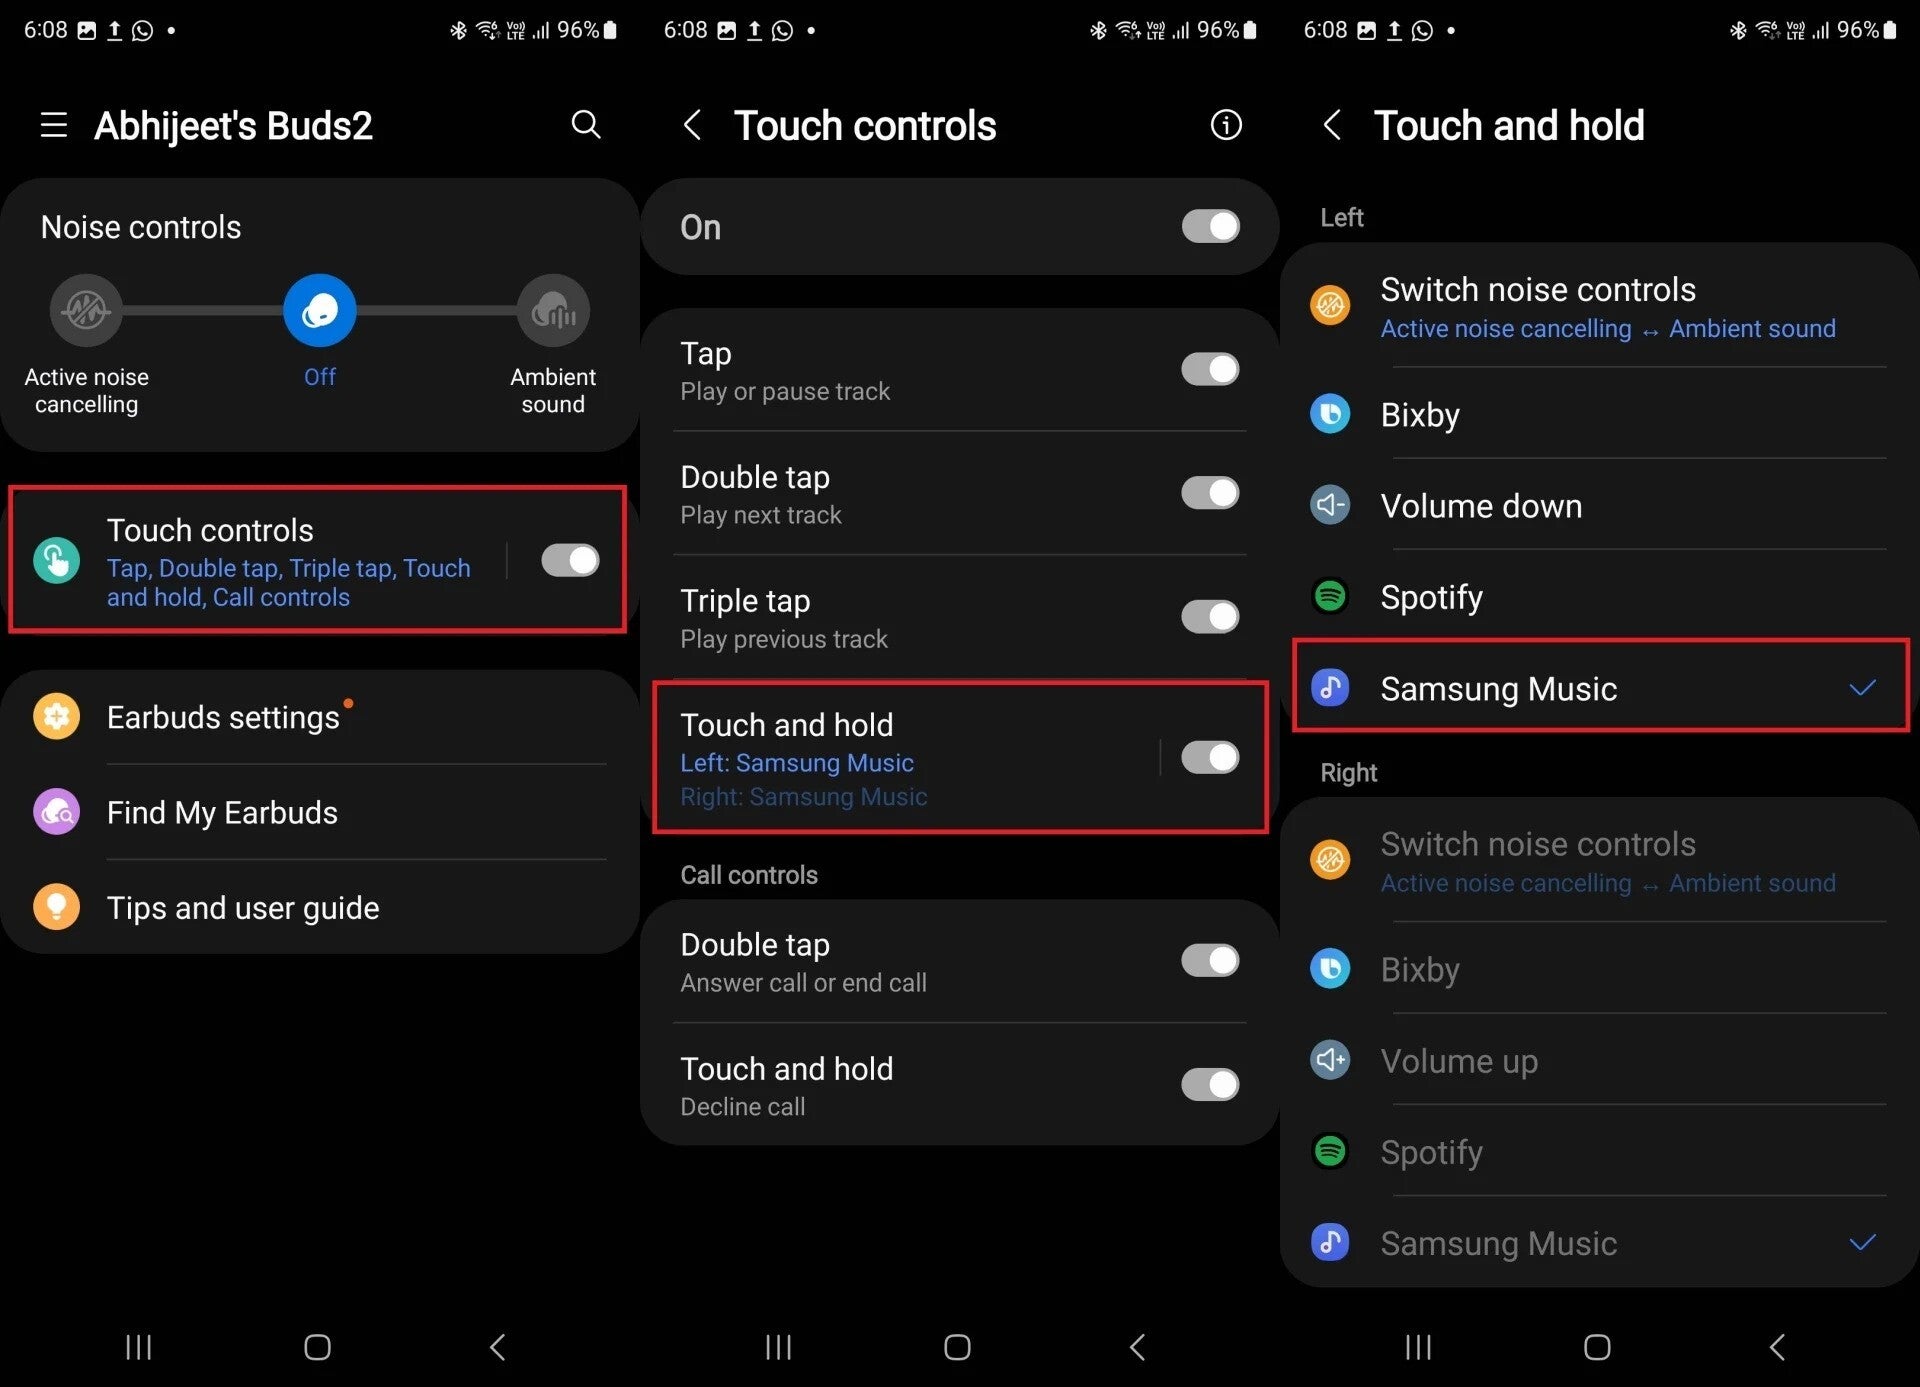 Image Credit–SamMobile - Better late than never: Samsung Music App now compatible with Galaxy Buds touch controls